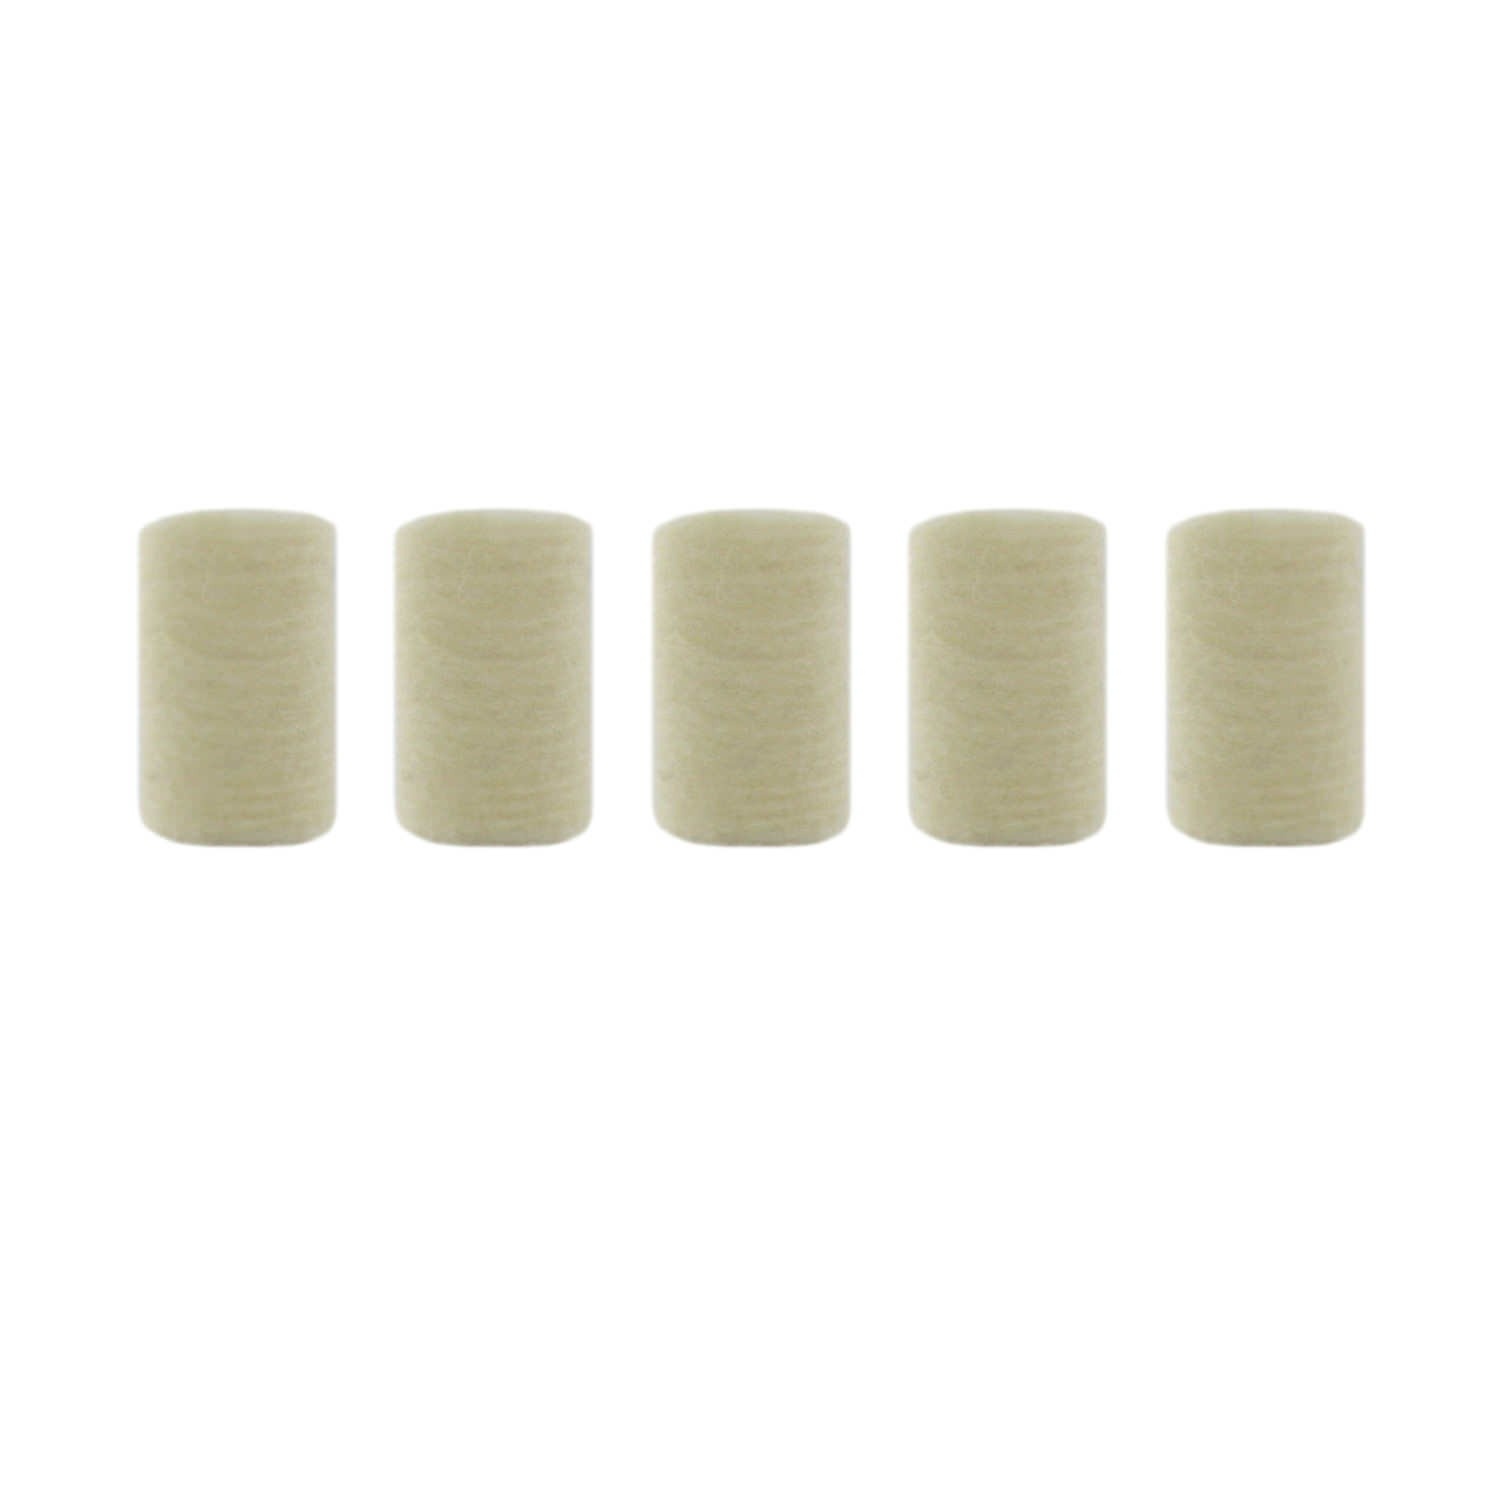 Devilbiss Pulmo Aide Replacement Filters for 5650